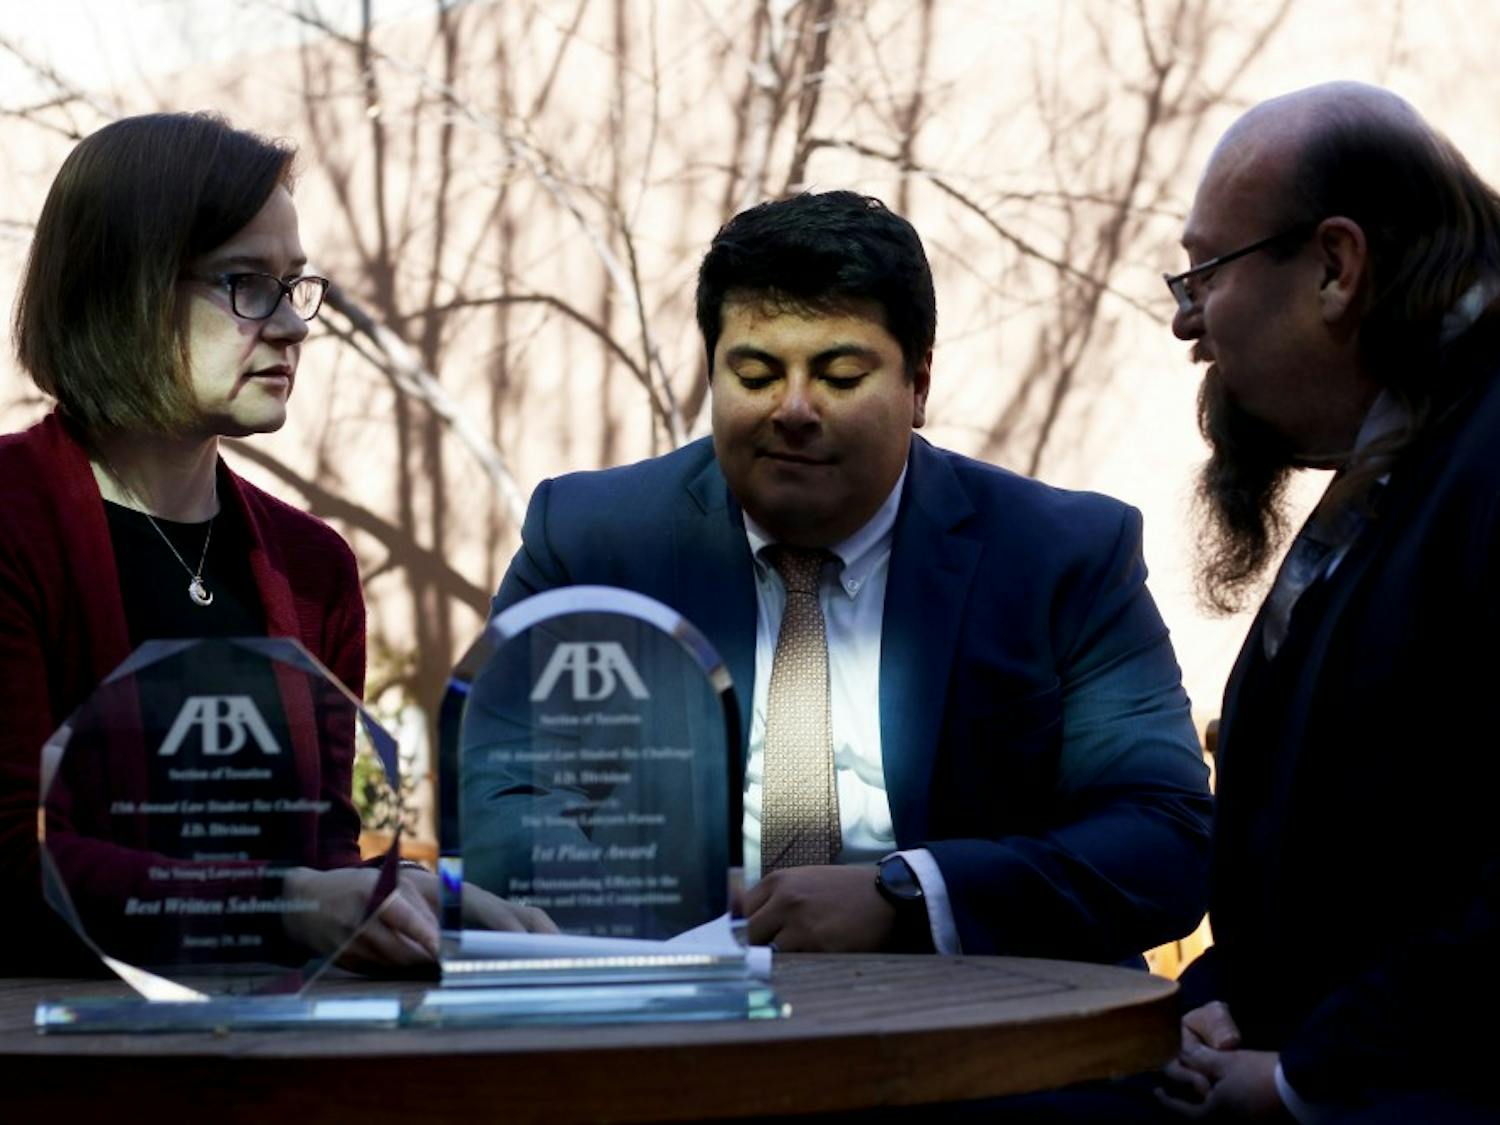 Mary Leto Pareja, Frank Cardeza and Scott Woody sit and discuss law cases outside the Law School Wednesday afternoon. The trophies presented were awarded to Woody and Cardeza for best overall and best written submission in the J.D. division of the 15th Annual ABA Law Student Tax Challenge.